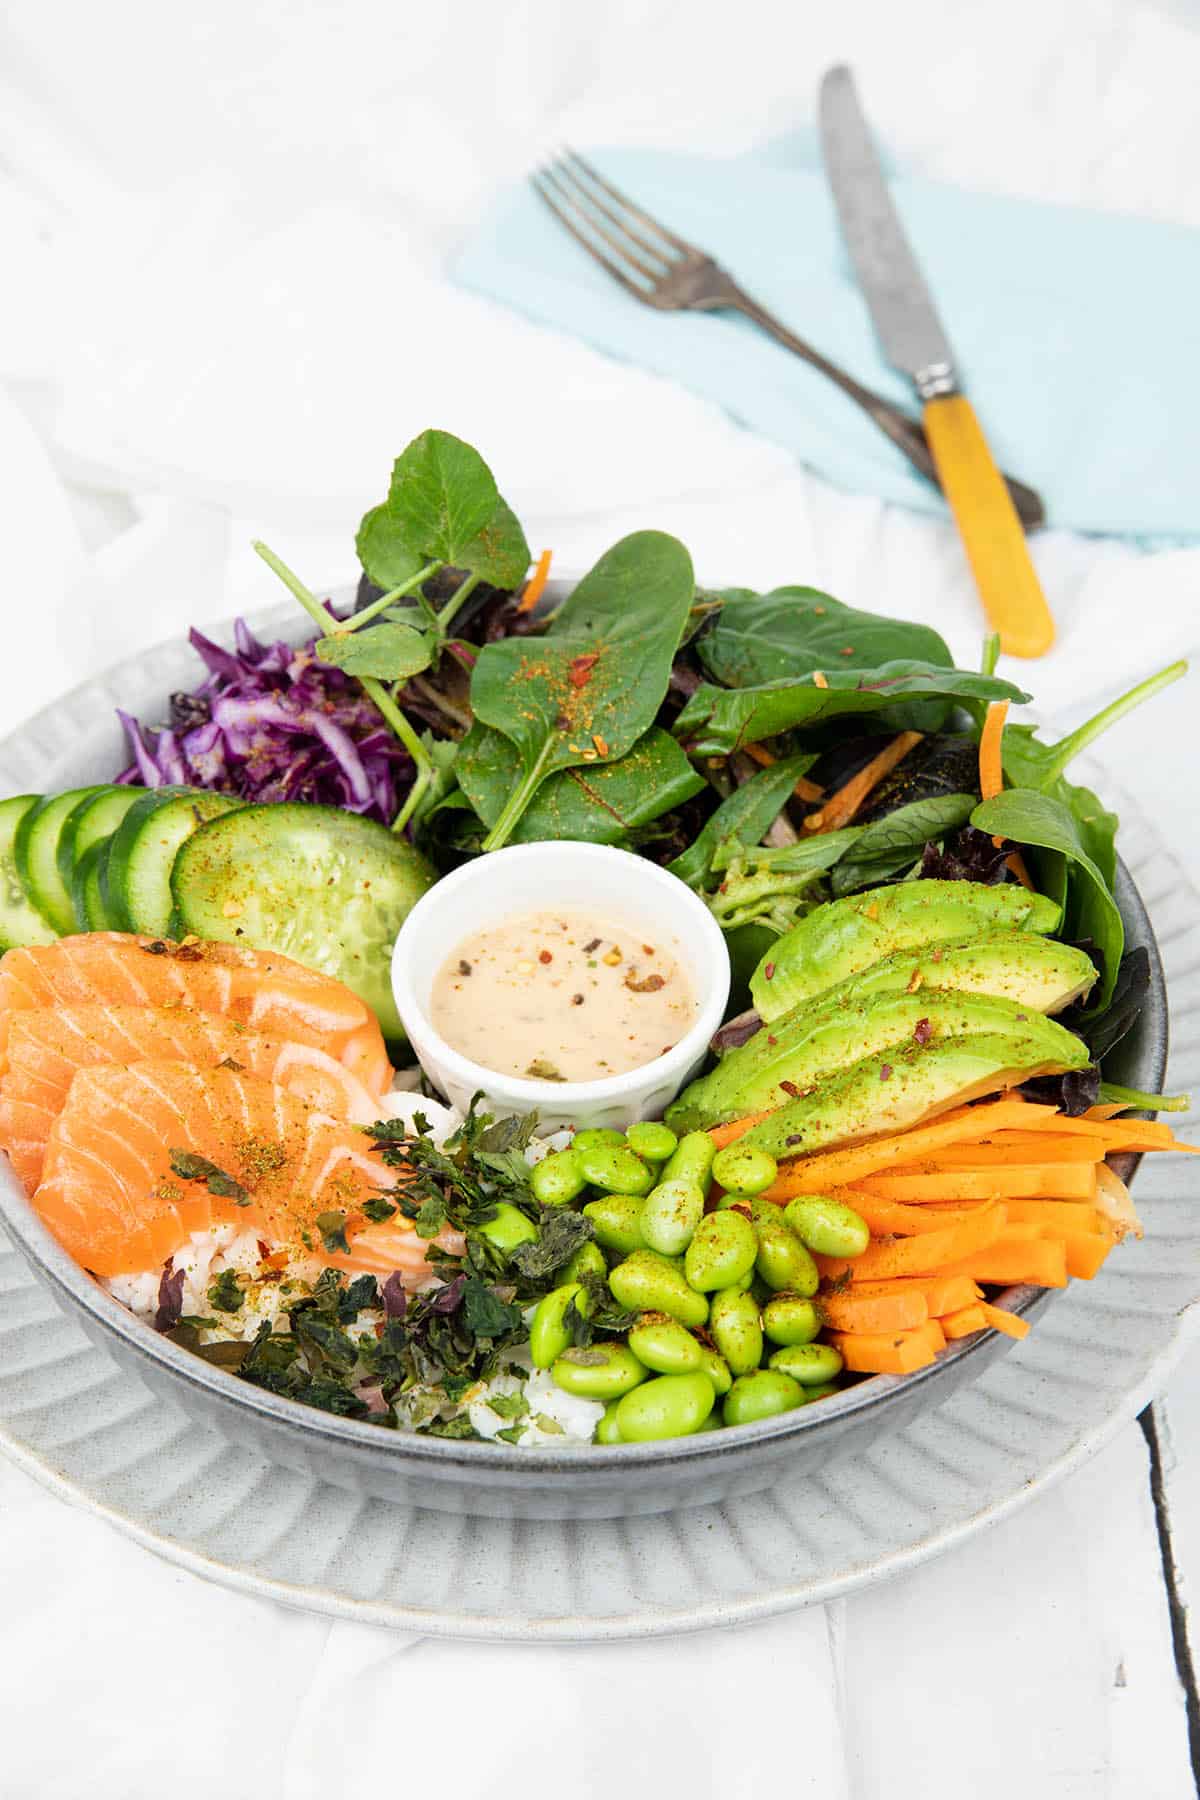 Portrait image Poke bowl on a grey plate and white background include salad items and salmon